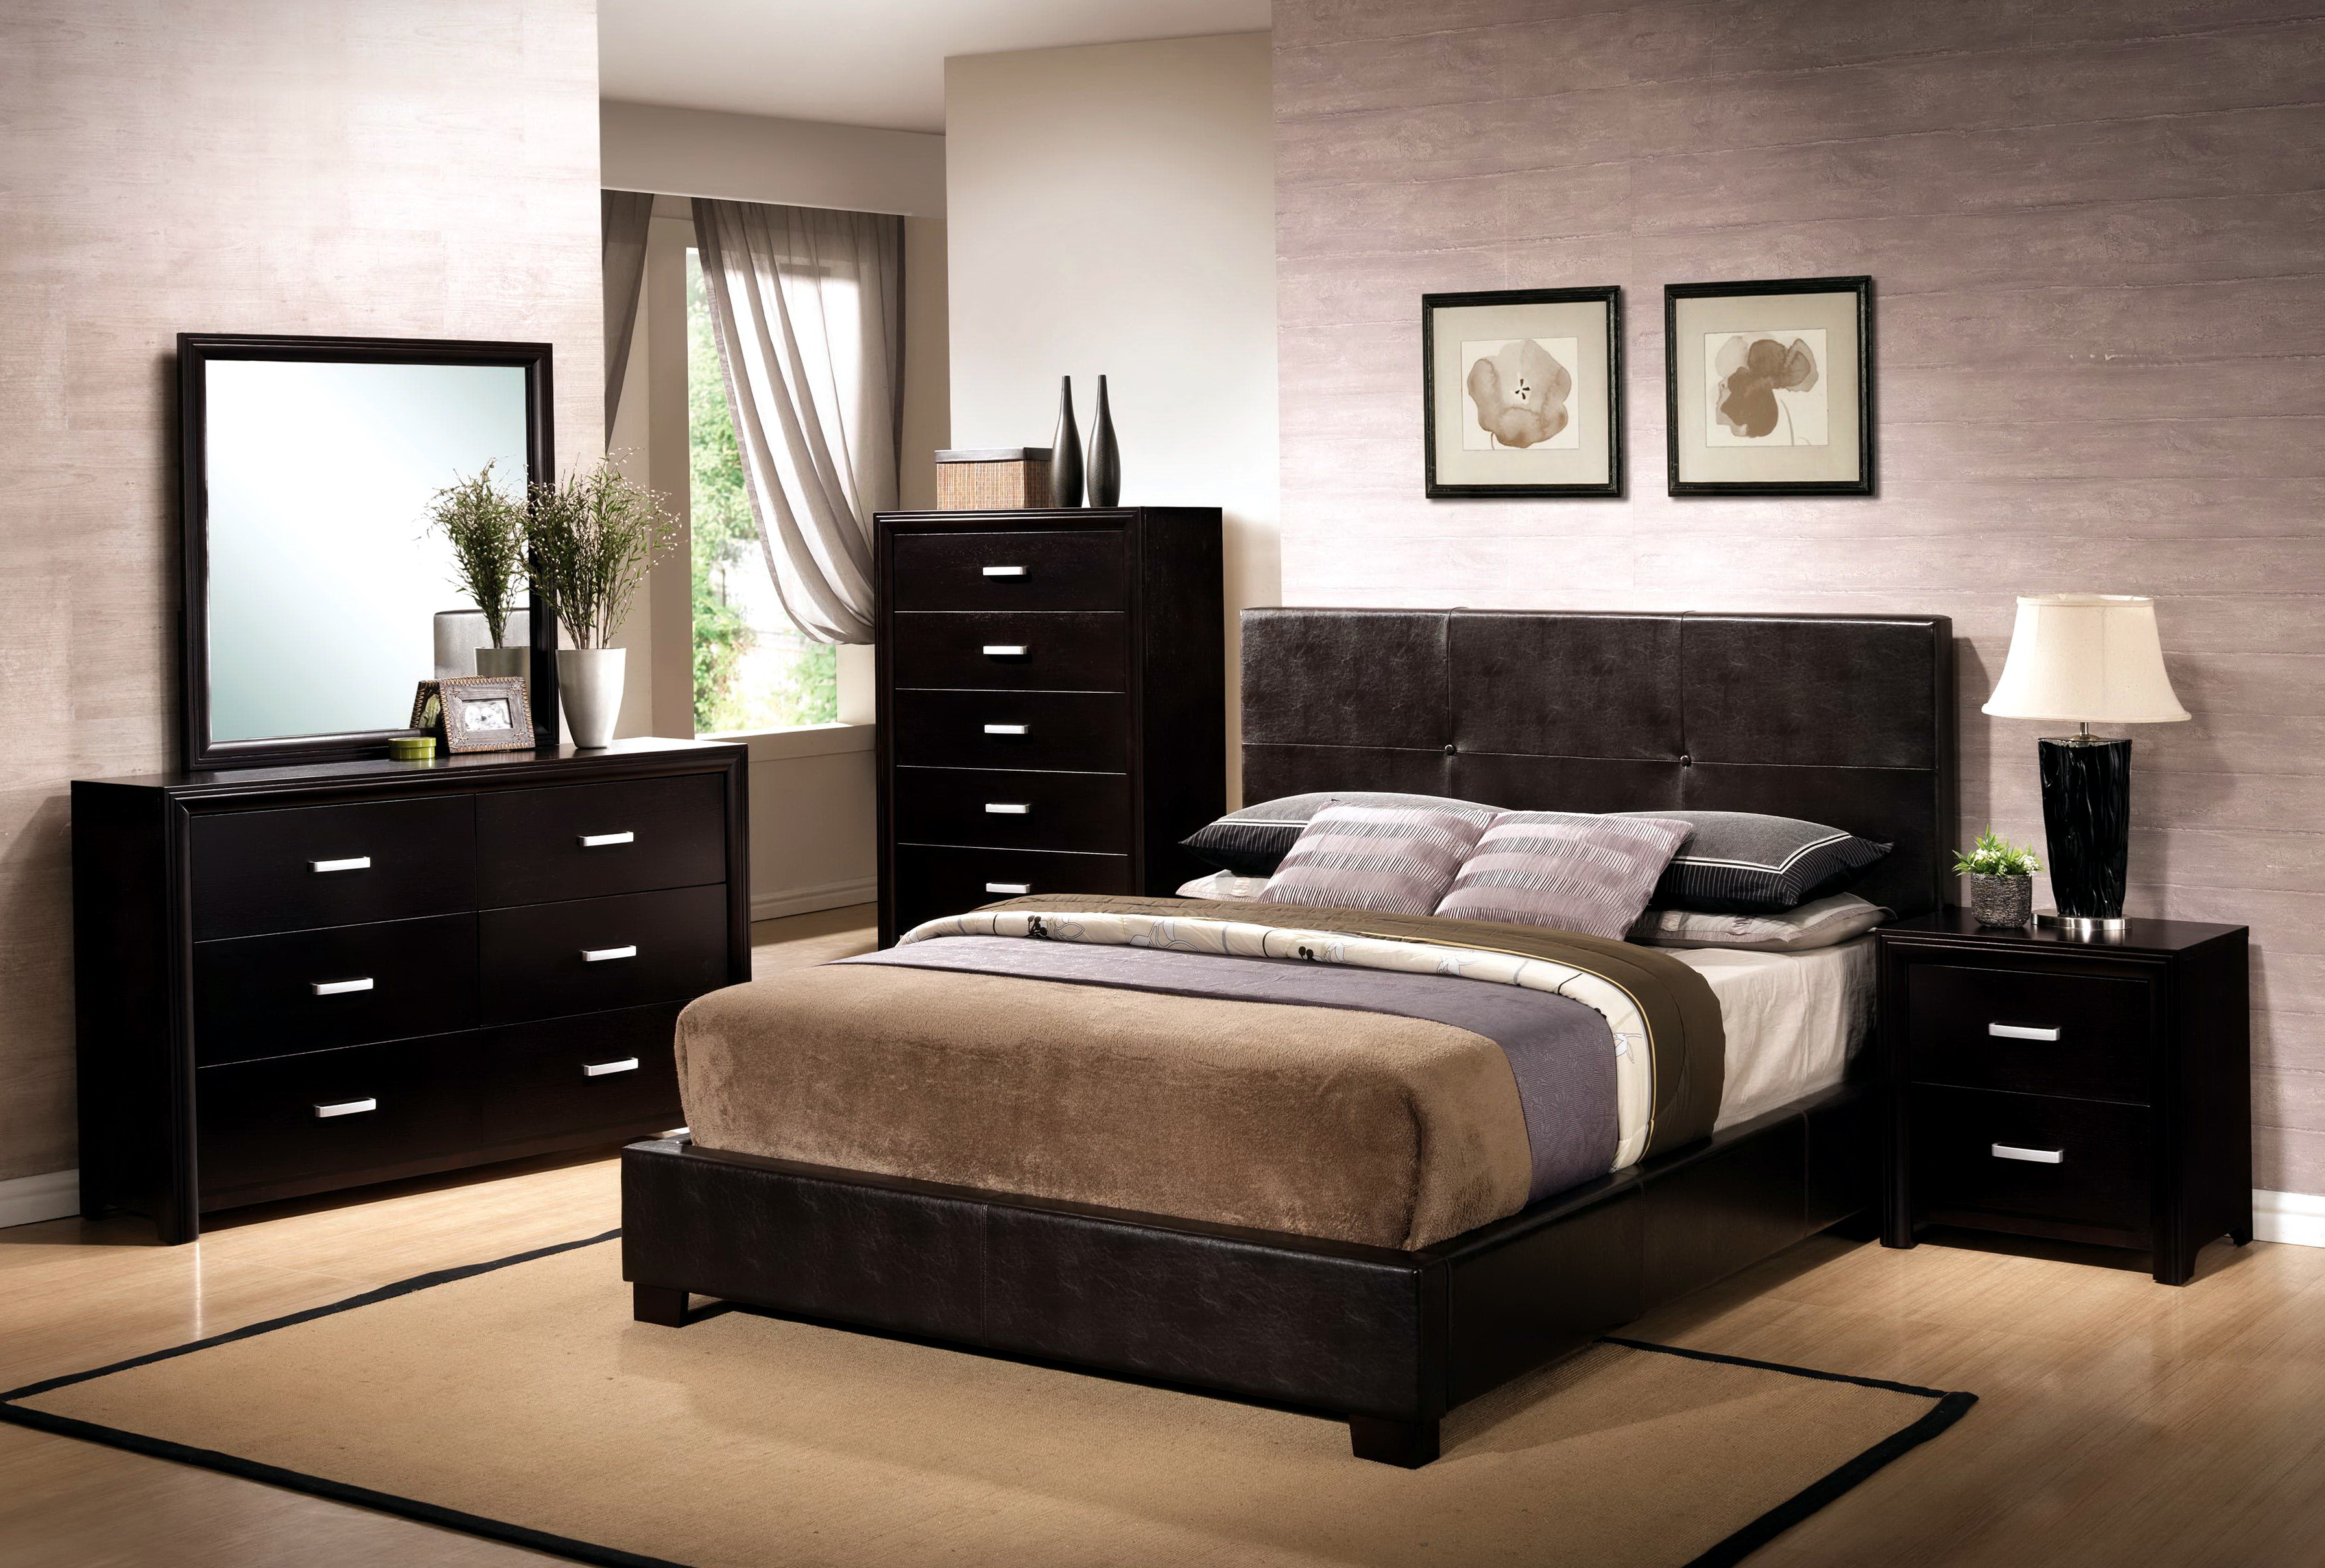 Rooms To Go Bedroom Sets Clearance Beds 27028 Home